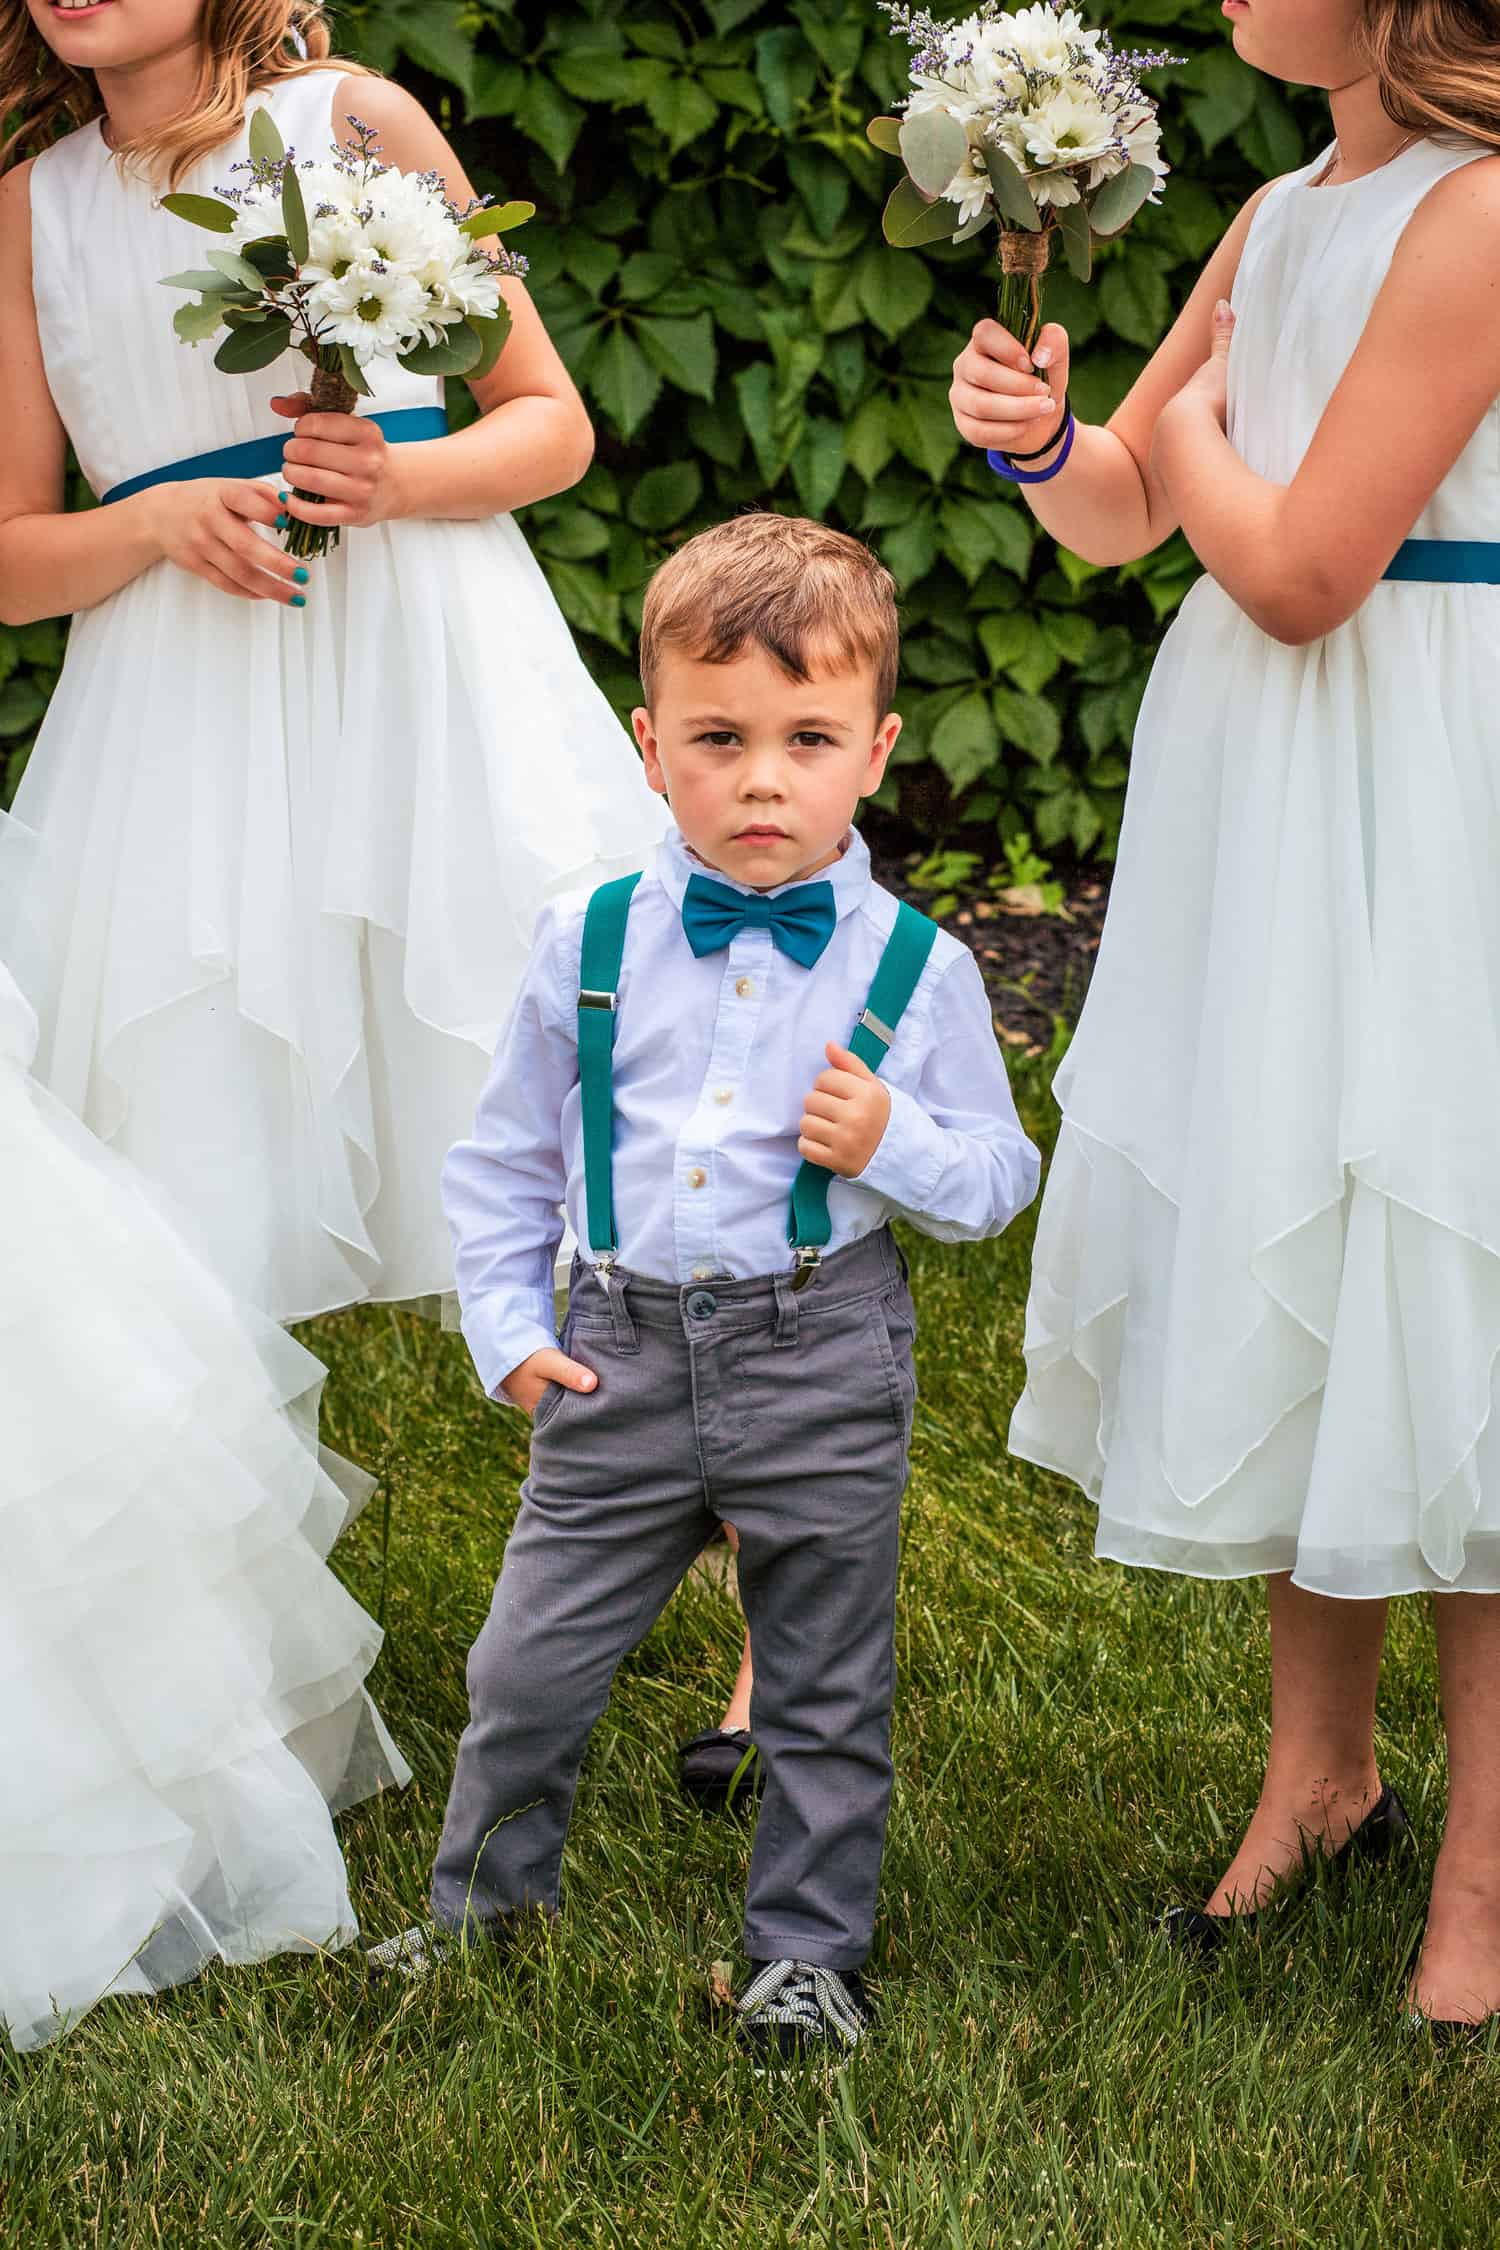 A little boy is standing next to a group of bridesmaids.